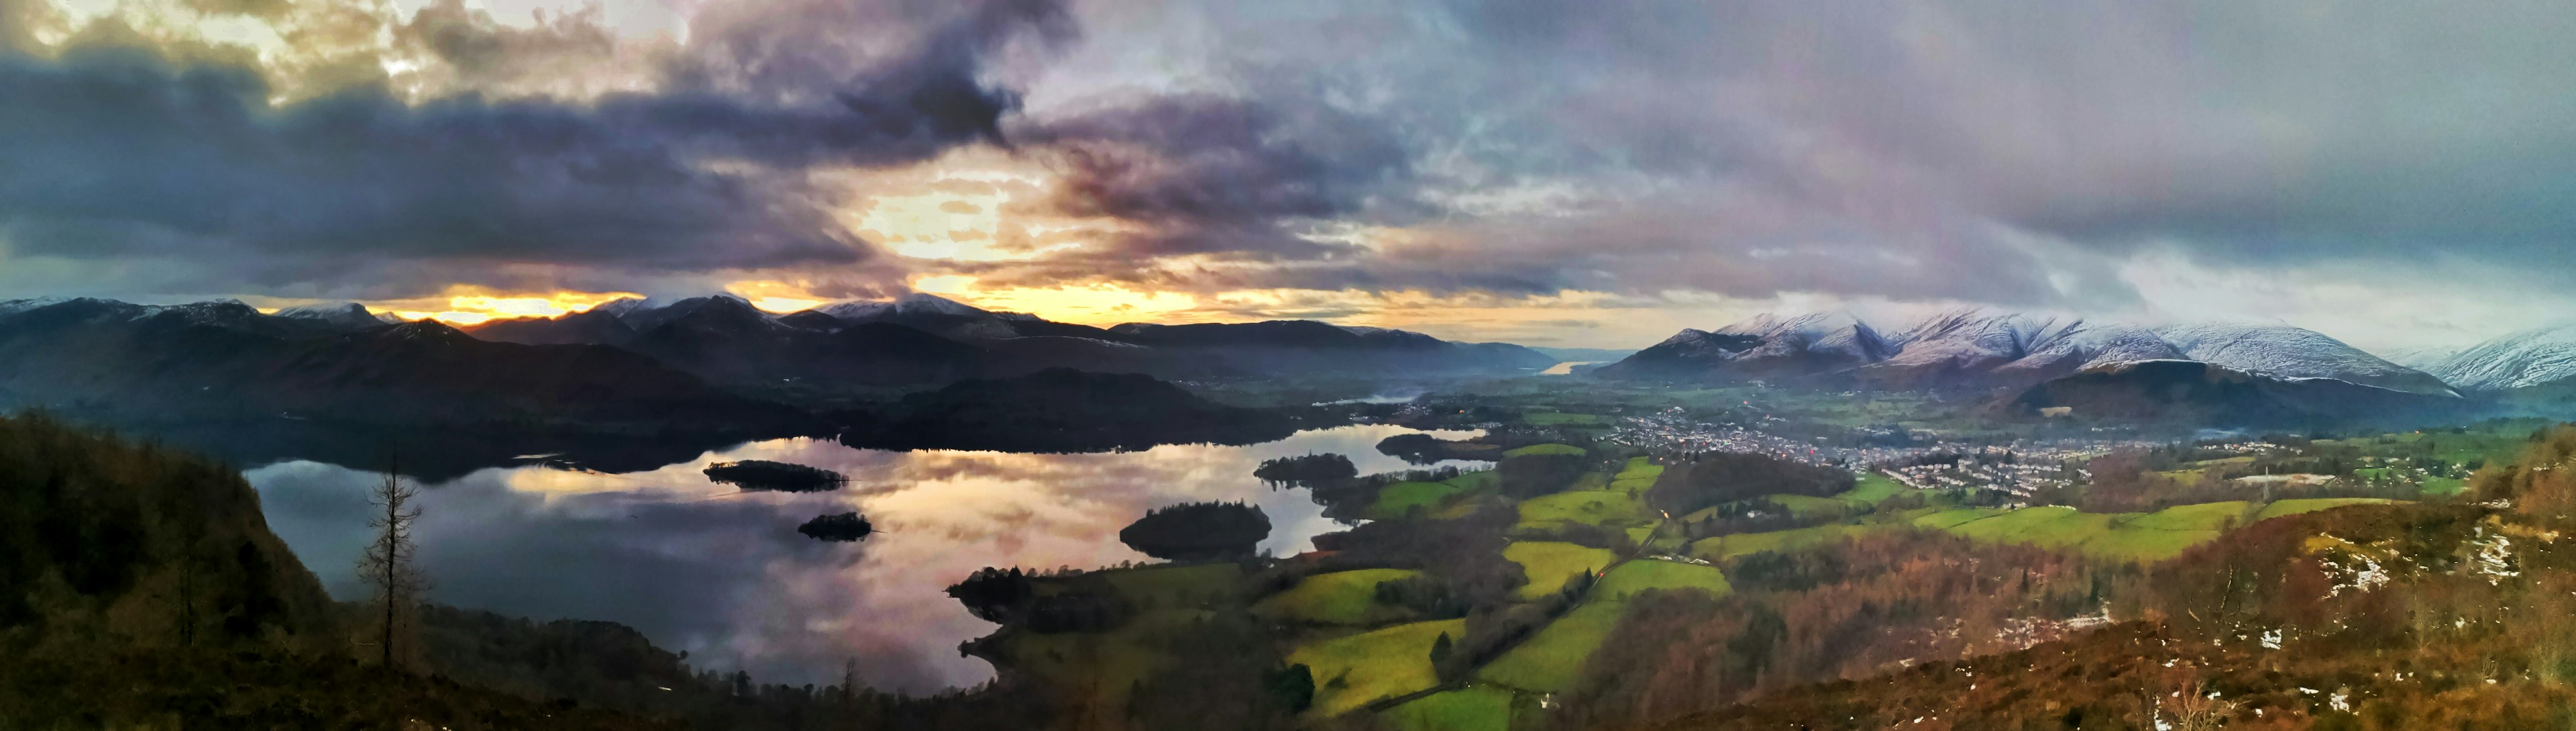 Panoramic view showing Derwent water and mountains in the distance